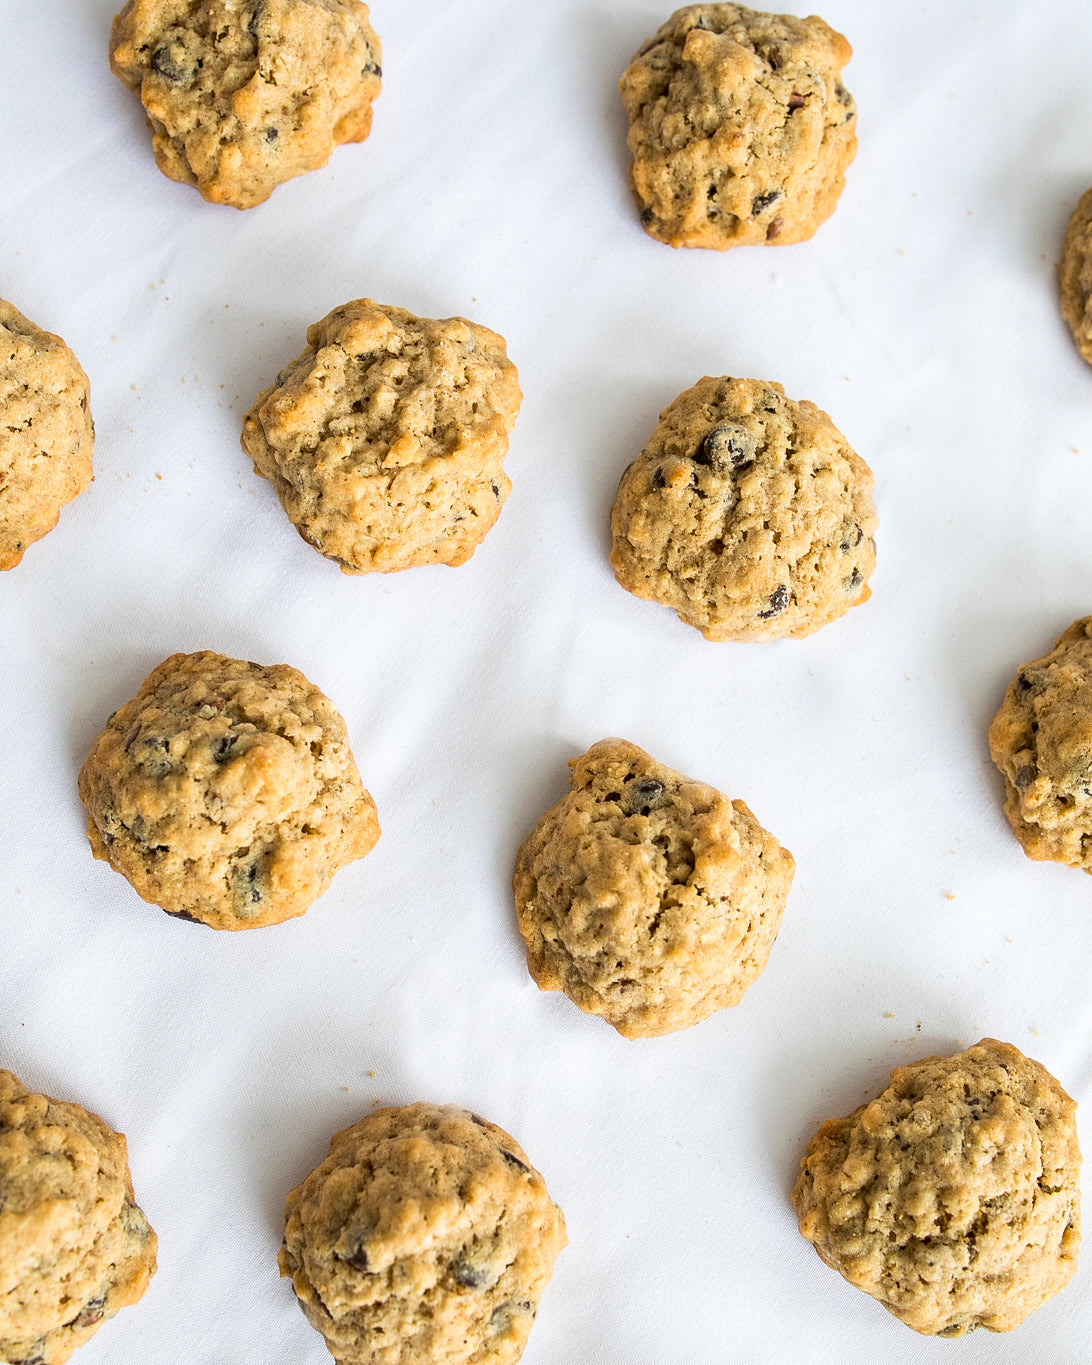 Chocolate Chip Lactation Cookies